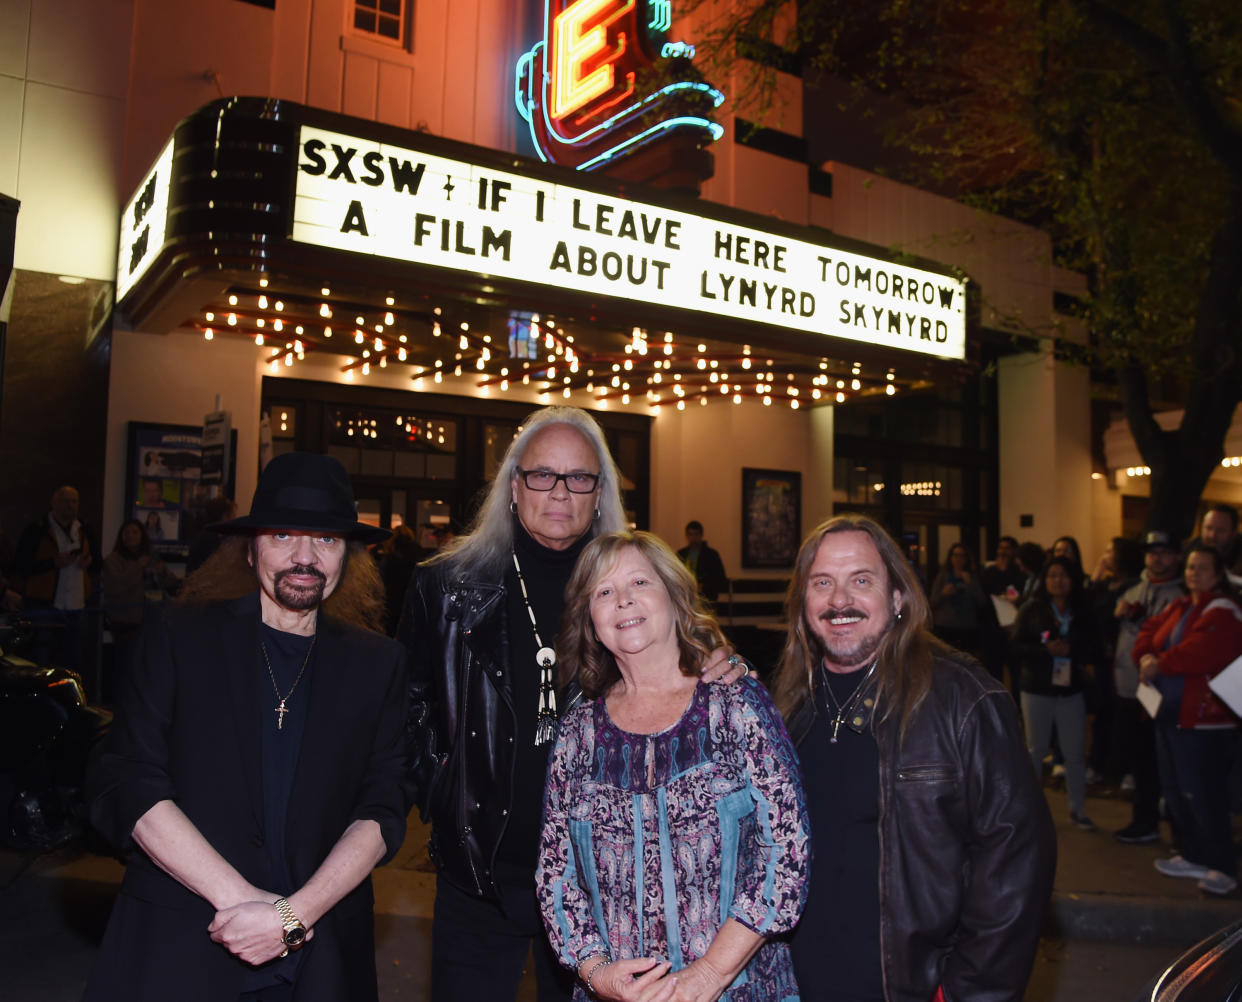 Lynyrd Skynyrd members Gary Rossington, Rickey Medlocke, and Johnny Van Zant attend the <em>If I Leave Here Tomorrow</em> movie premiere at SXSW 2018 with Ronnie Van Zant’s widow, Judy. (Photo: R. Diamond/Getty Images for CMT)